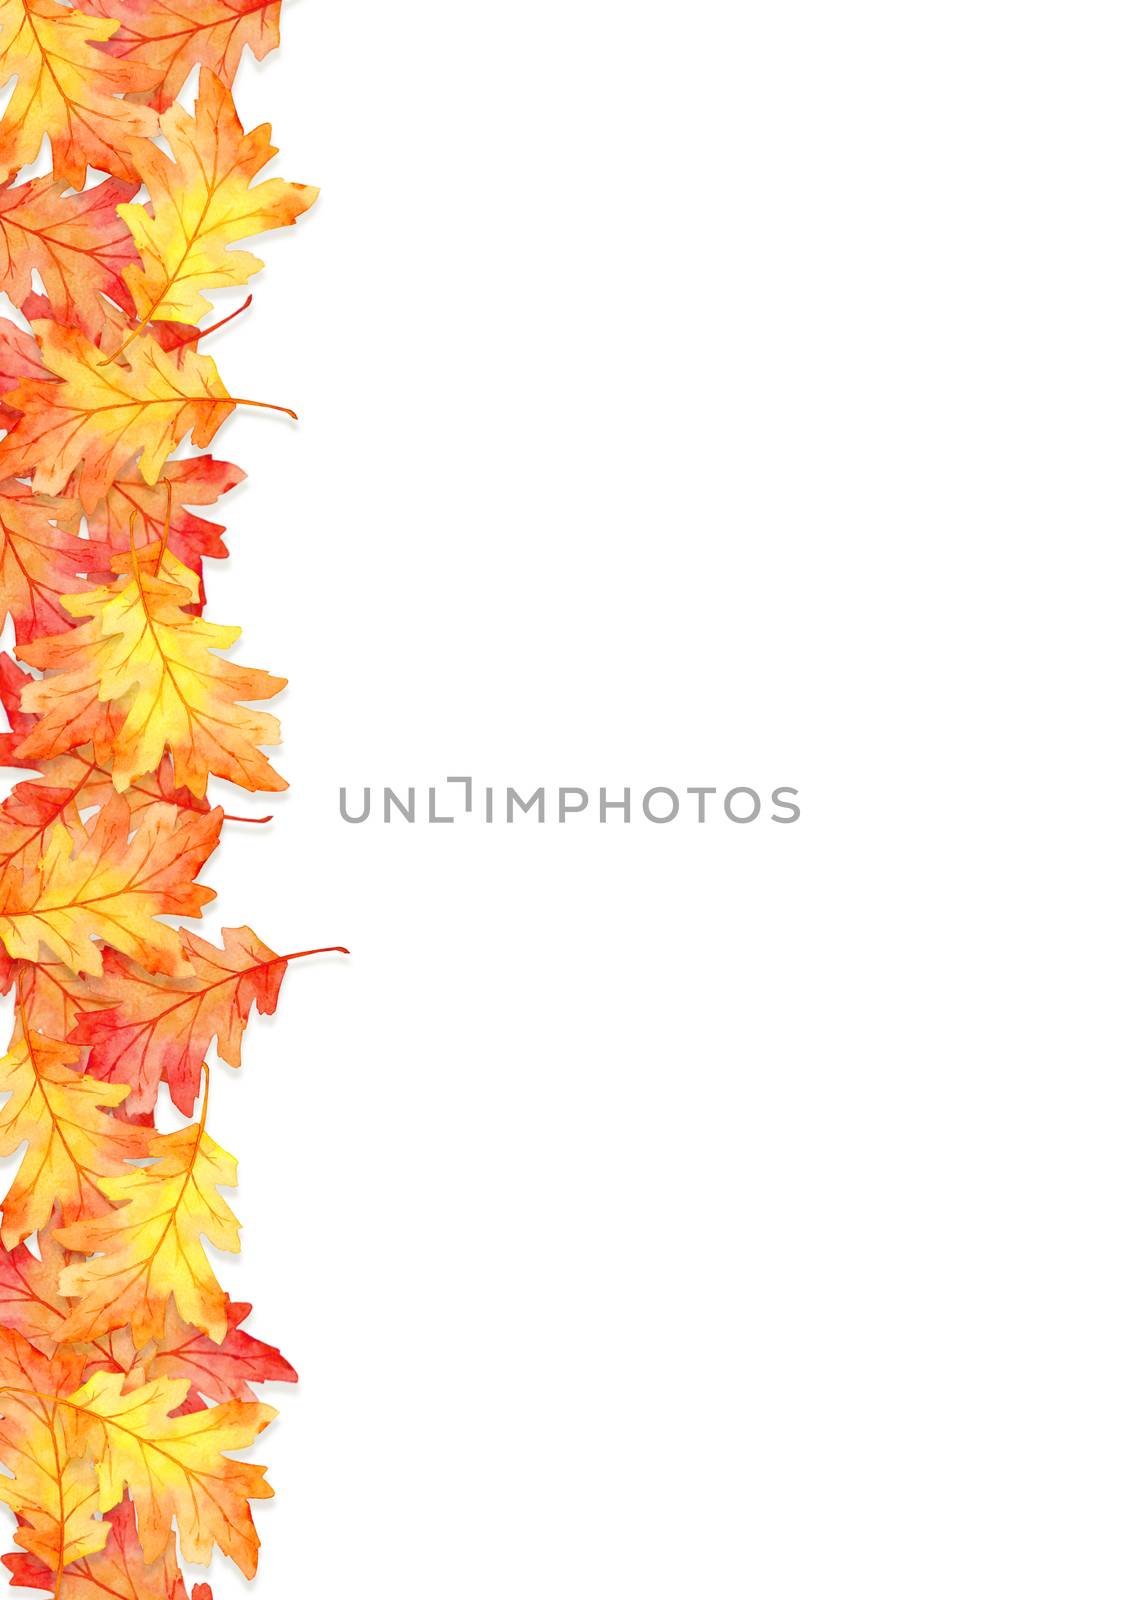 frame of red leaves in autumn concept isolated on white background. Flat lay, top view, copy space. by Ungamrung